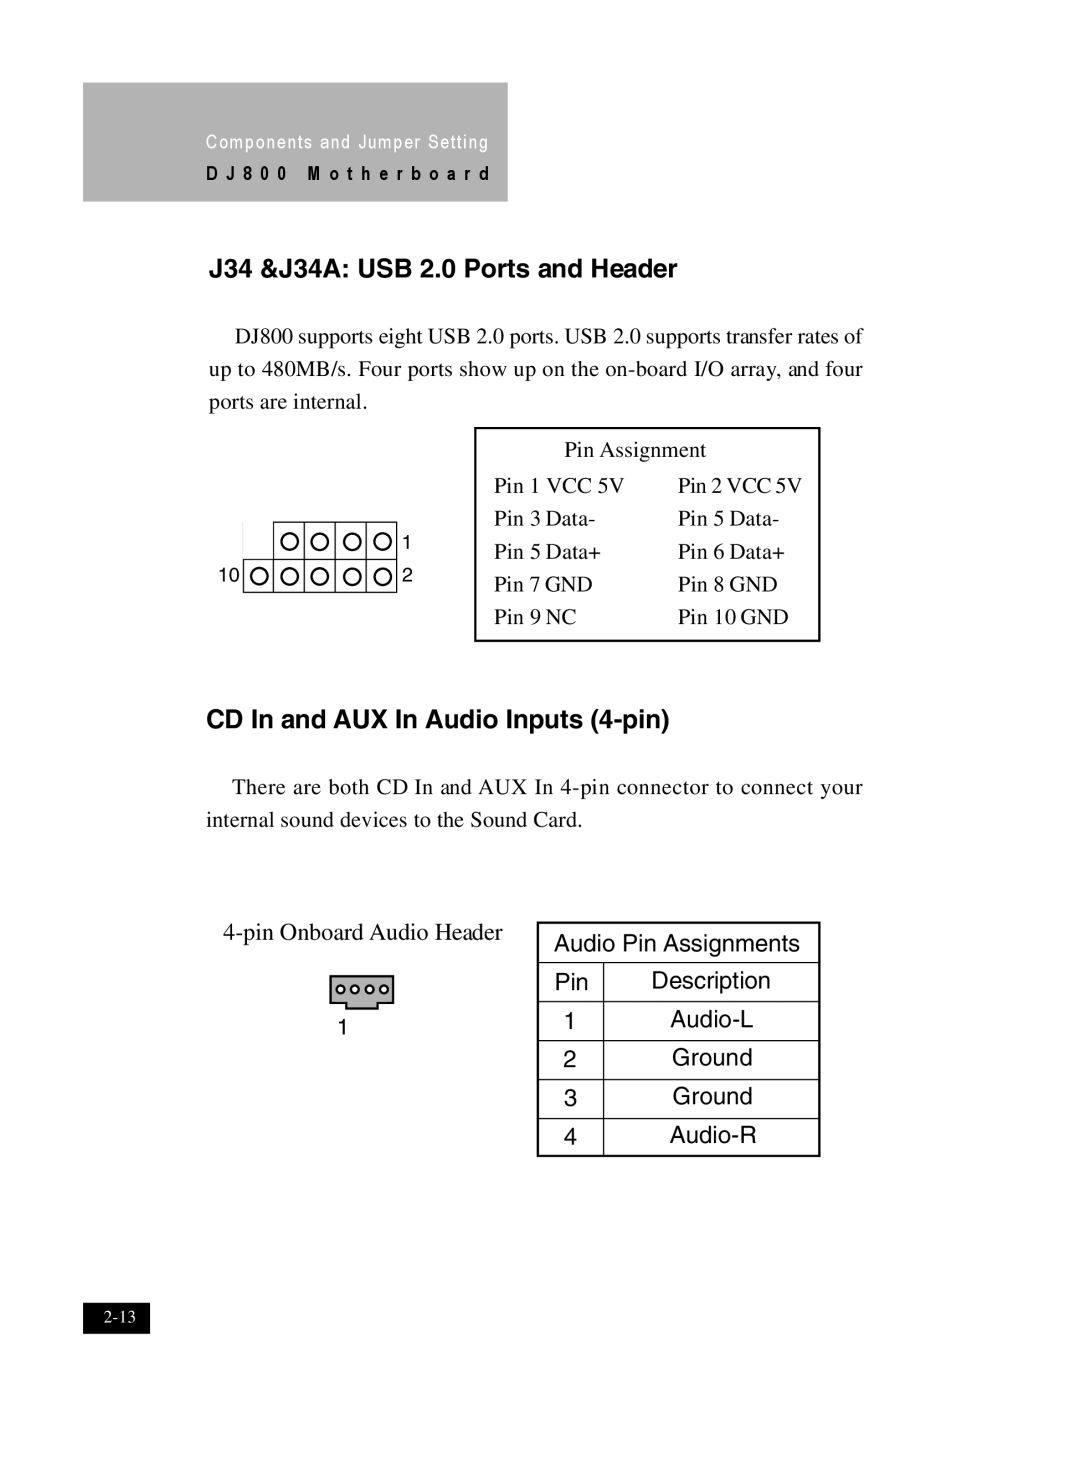 IBM DJ800 user manual J34 &J34A USB 2.0 Ports and Header, CD In and AUX In Audio Inputs 4-pin, Audio Pin Assignments 